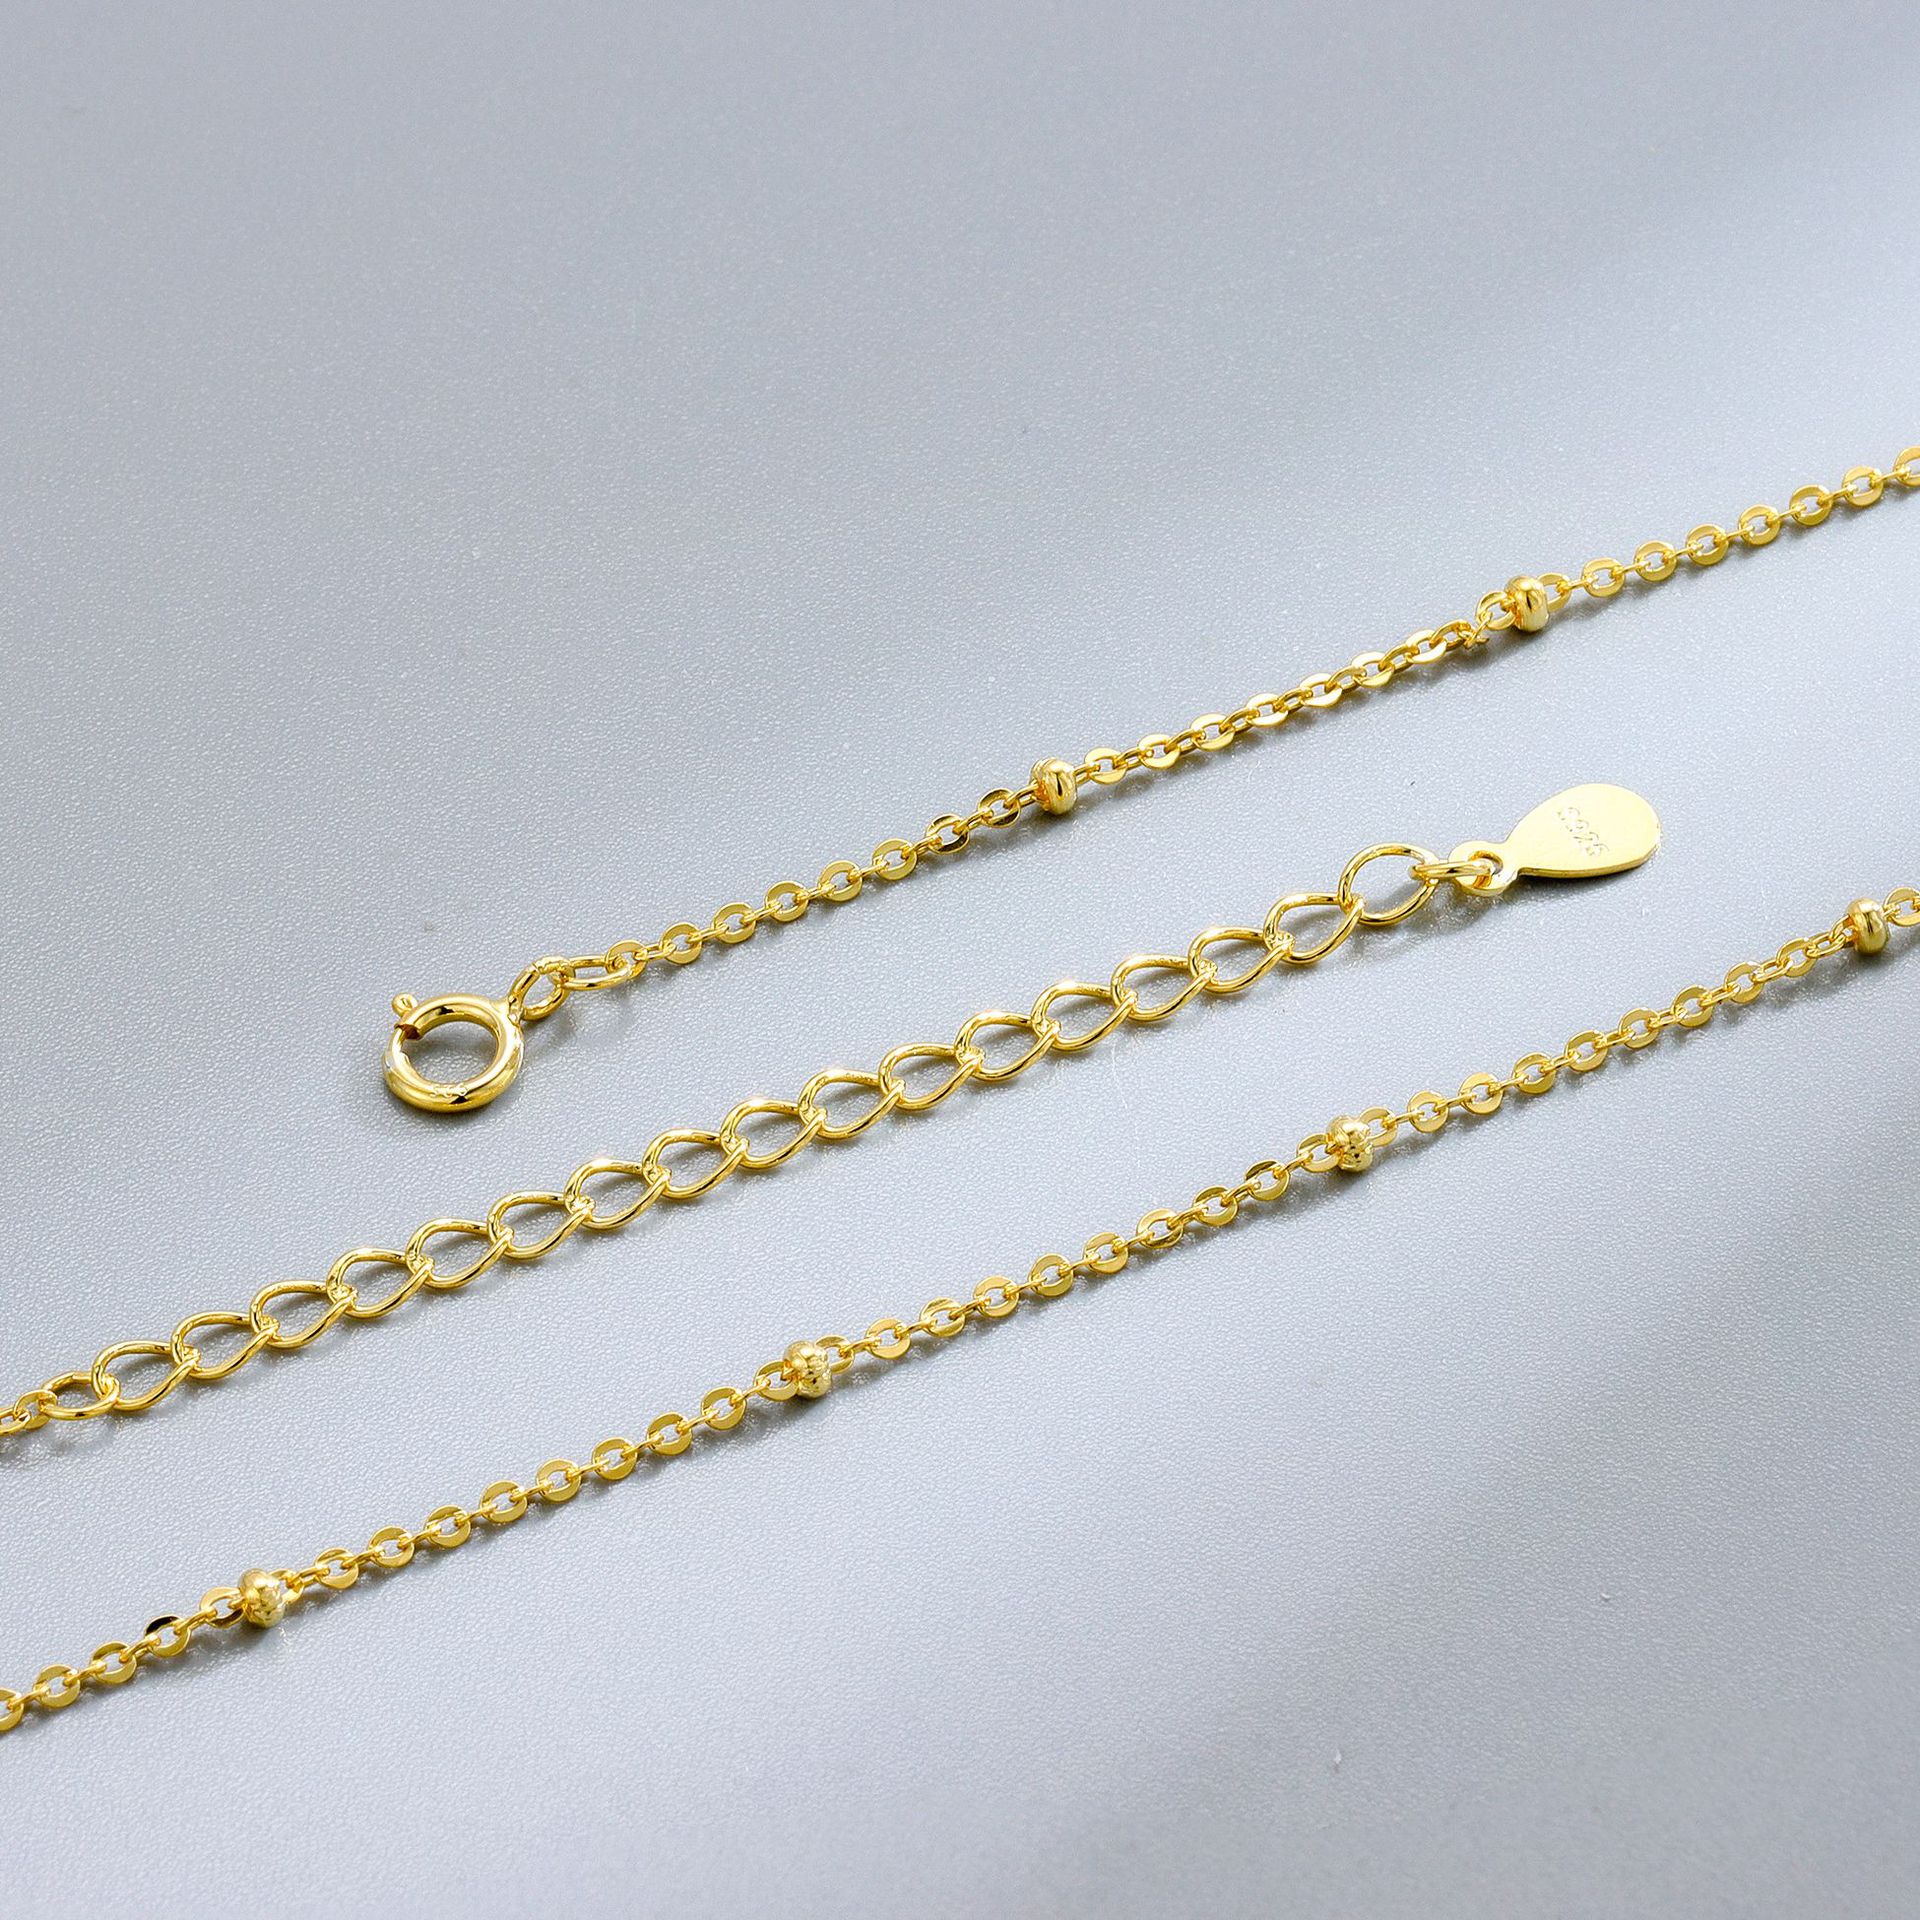 2:gold 2mm beads